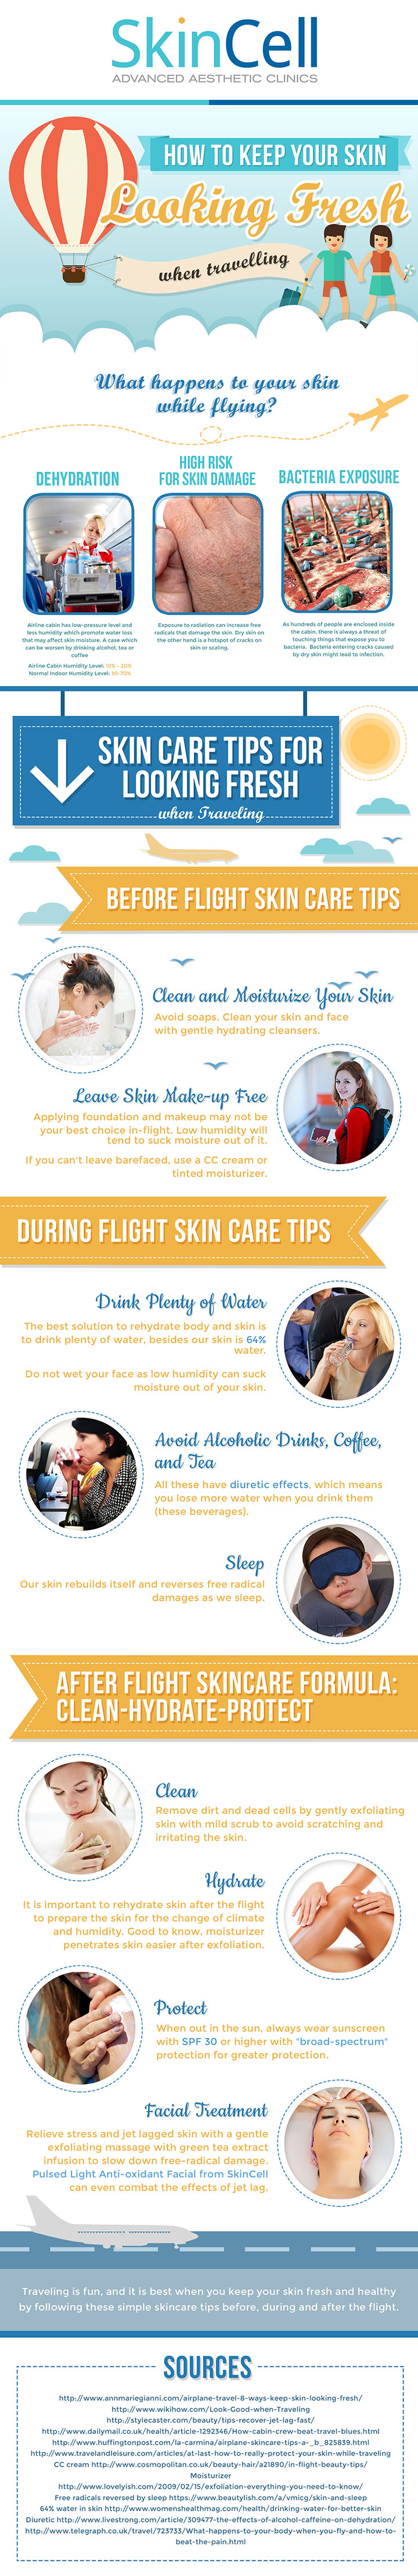 How to Keep Your Skin Looking Fresh When Traveling